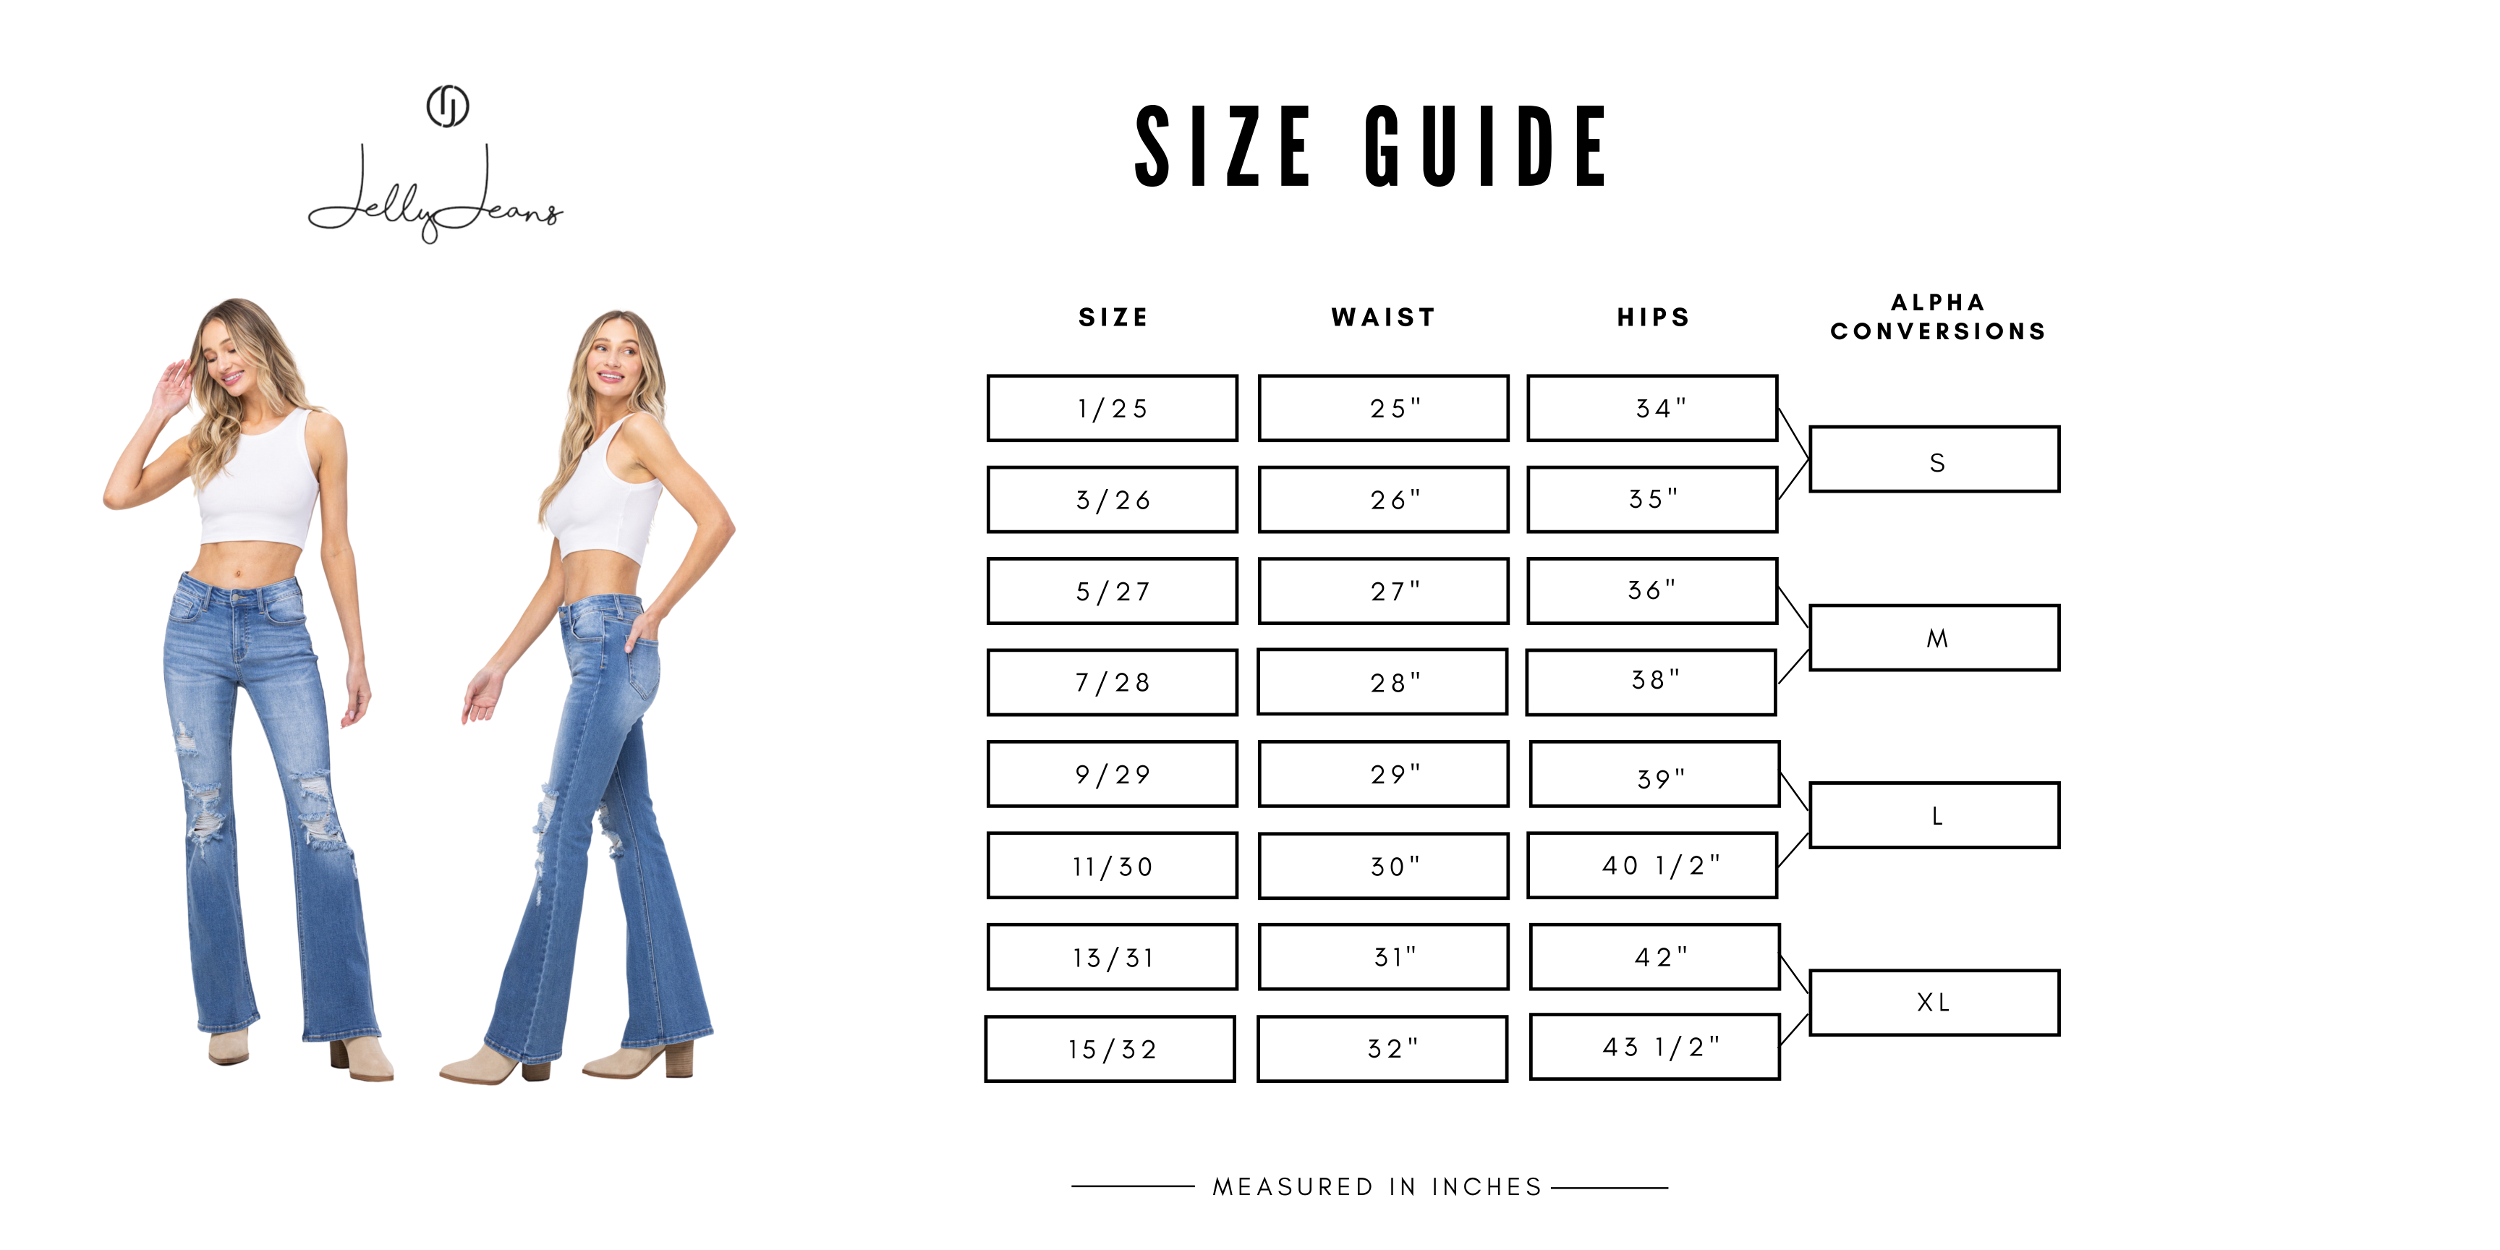 What is Size?